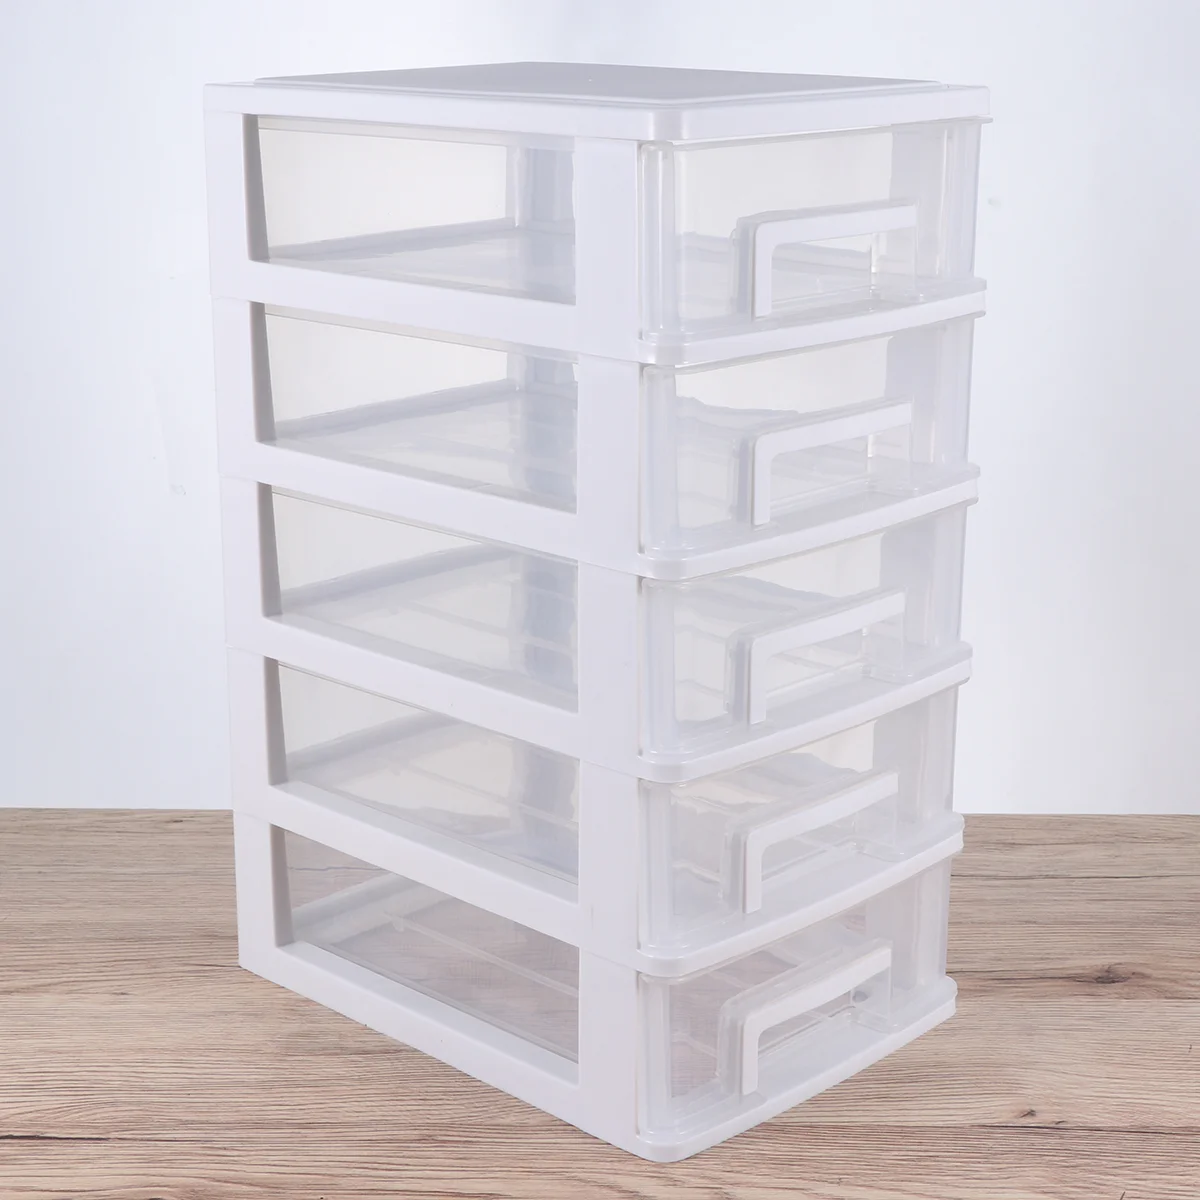 

Clothes Storage Drawers Stationary Plastic Boxes Portable Dresser Type Organizer Makeup Clear Silverware Cabinet